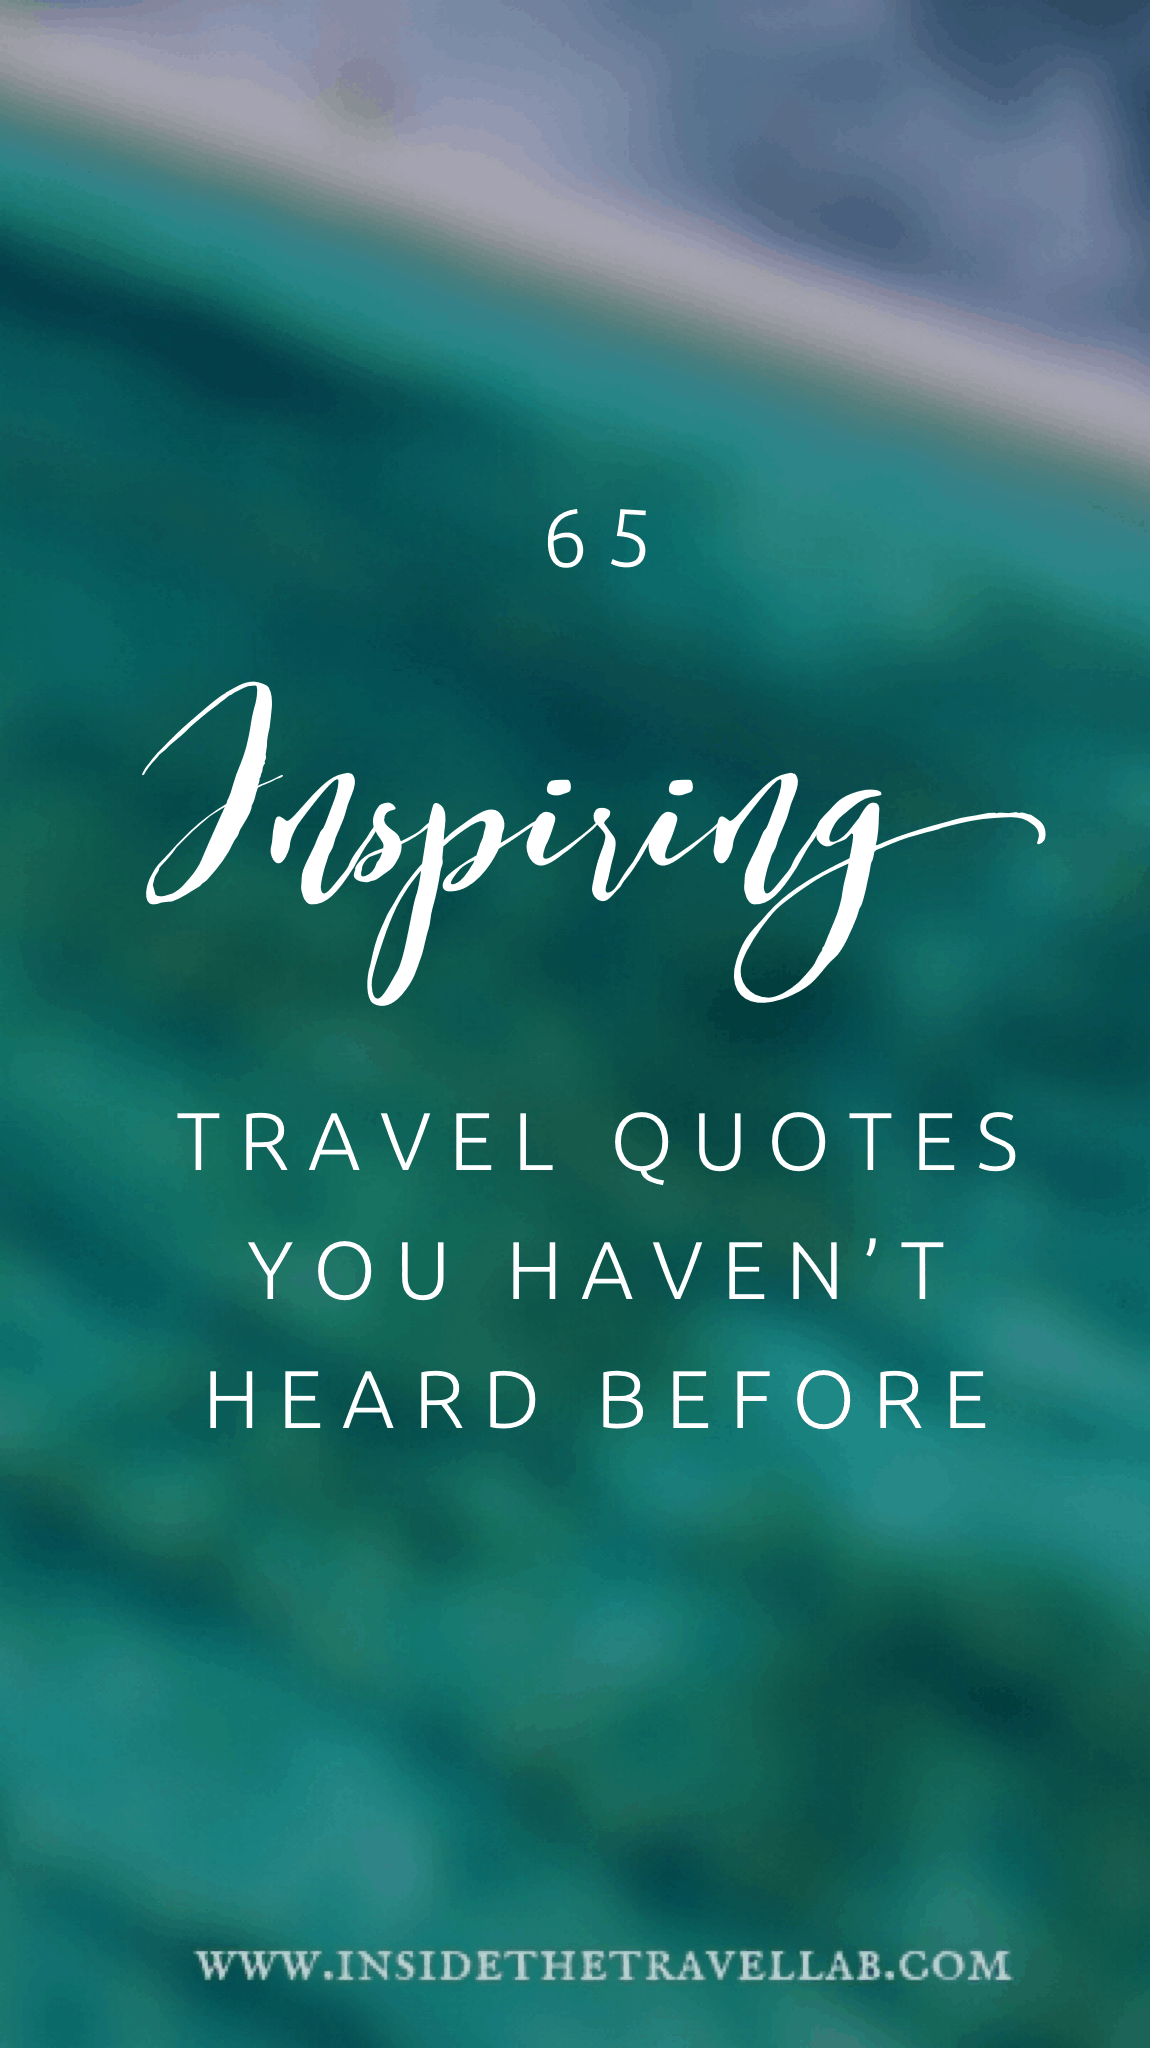 65 Inspiring Travel Quotes You Haven't Heard Before from Inside the Travel Lab